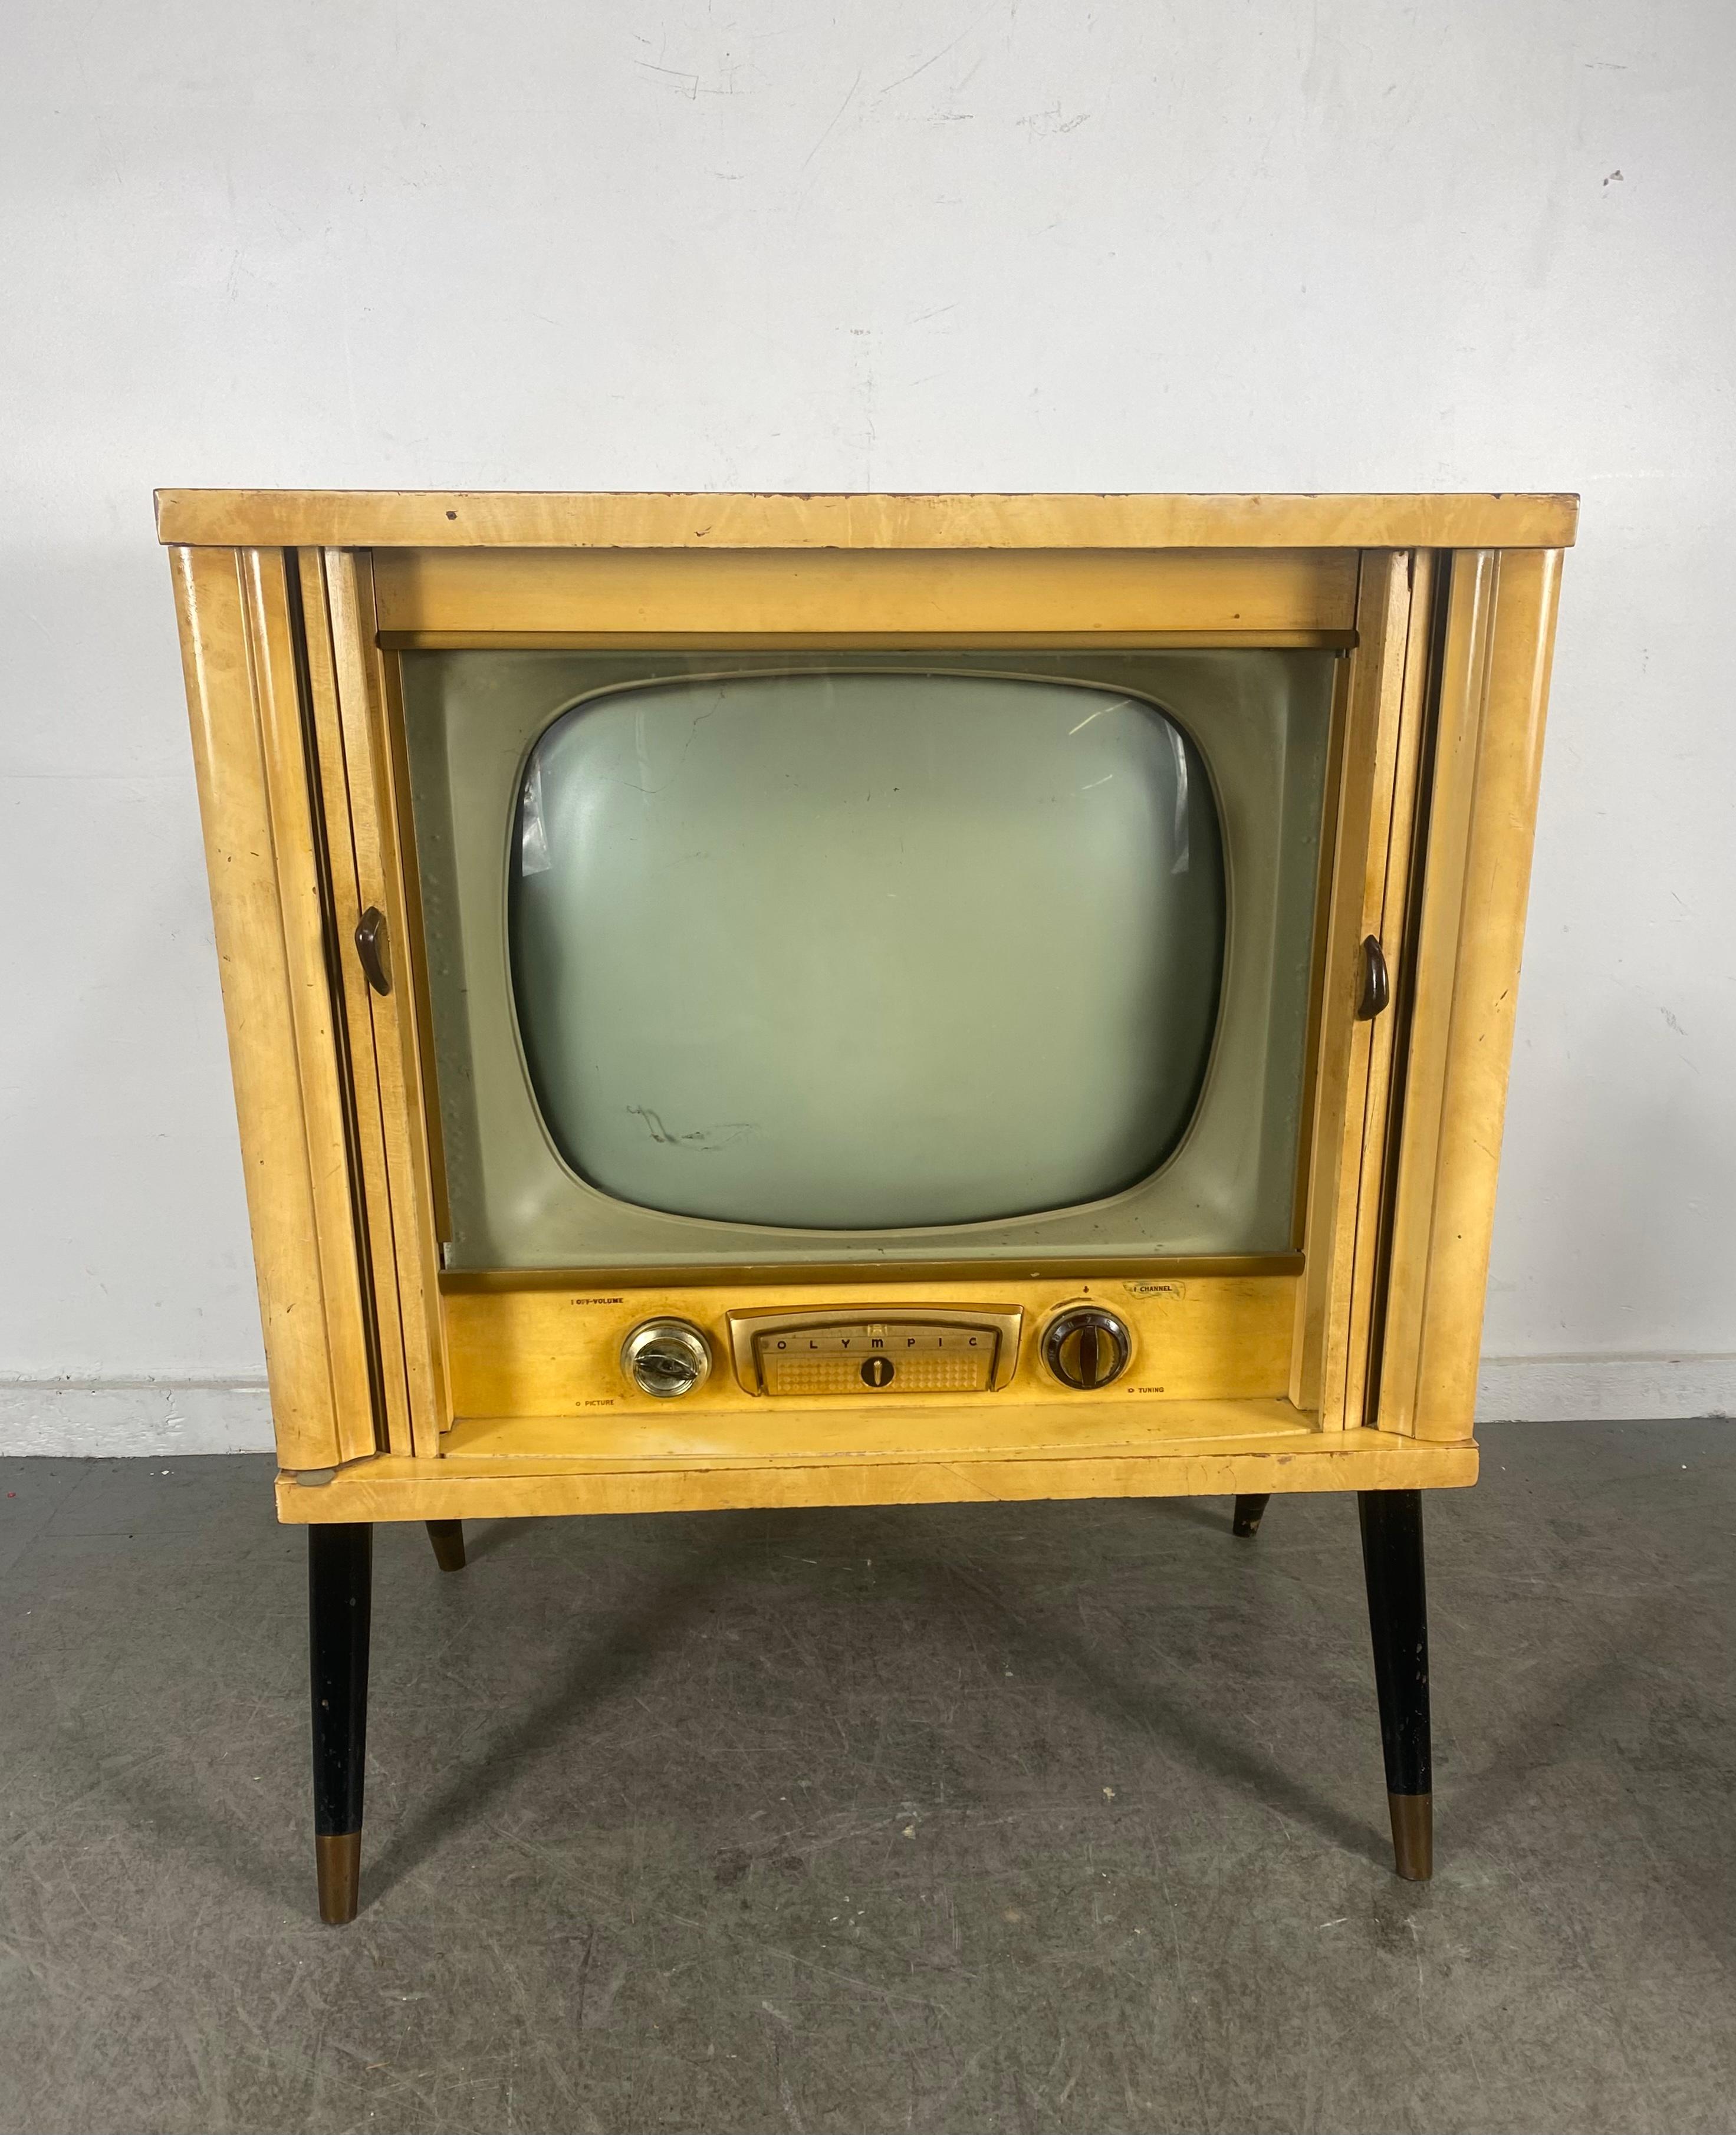 American Modernist Atomic 1950s Television by Olympic, Tambour Doors 